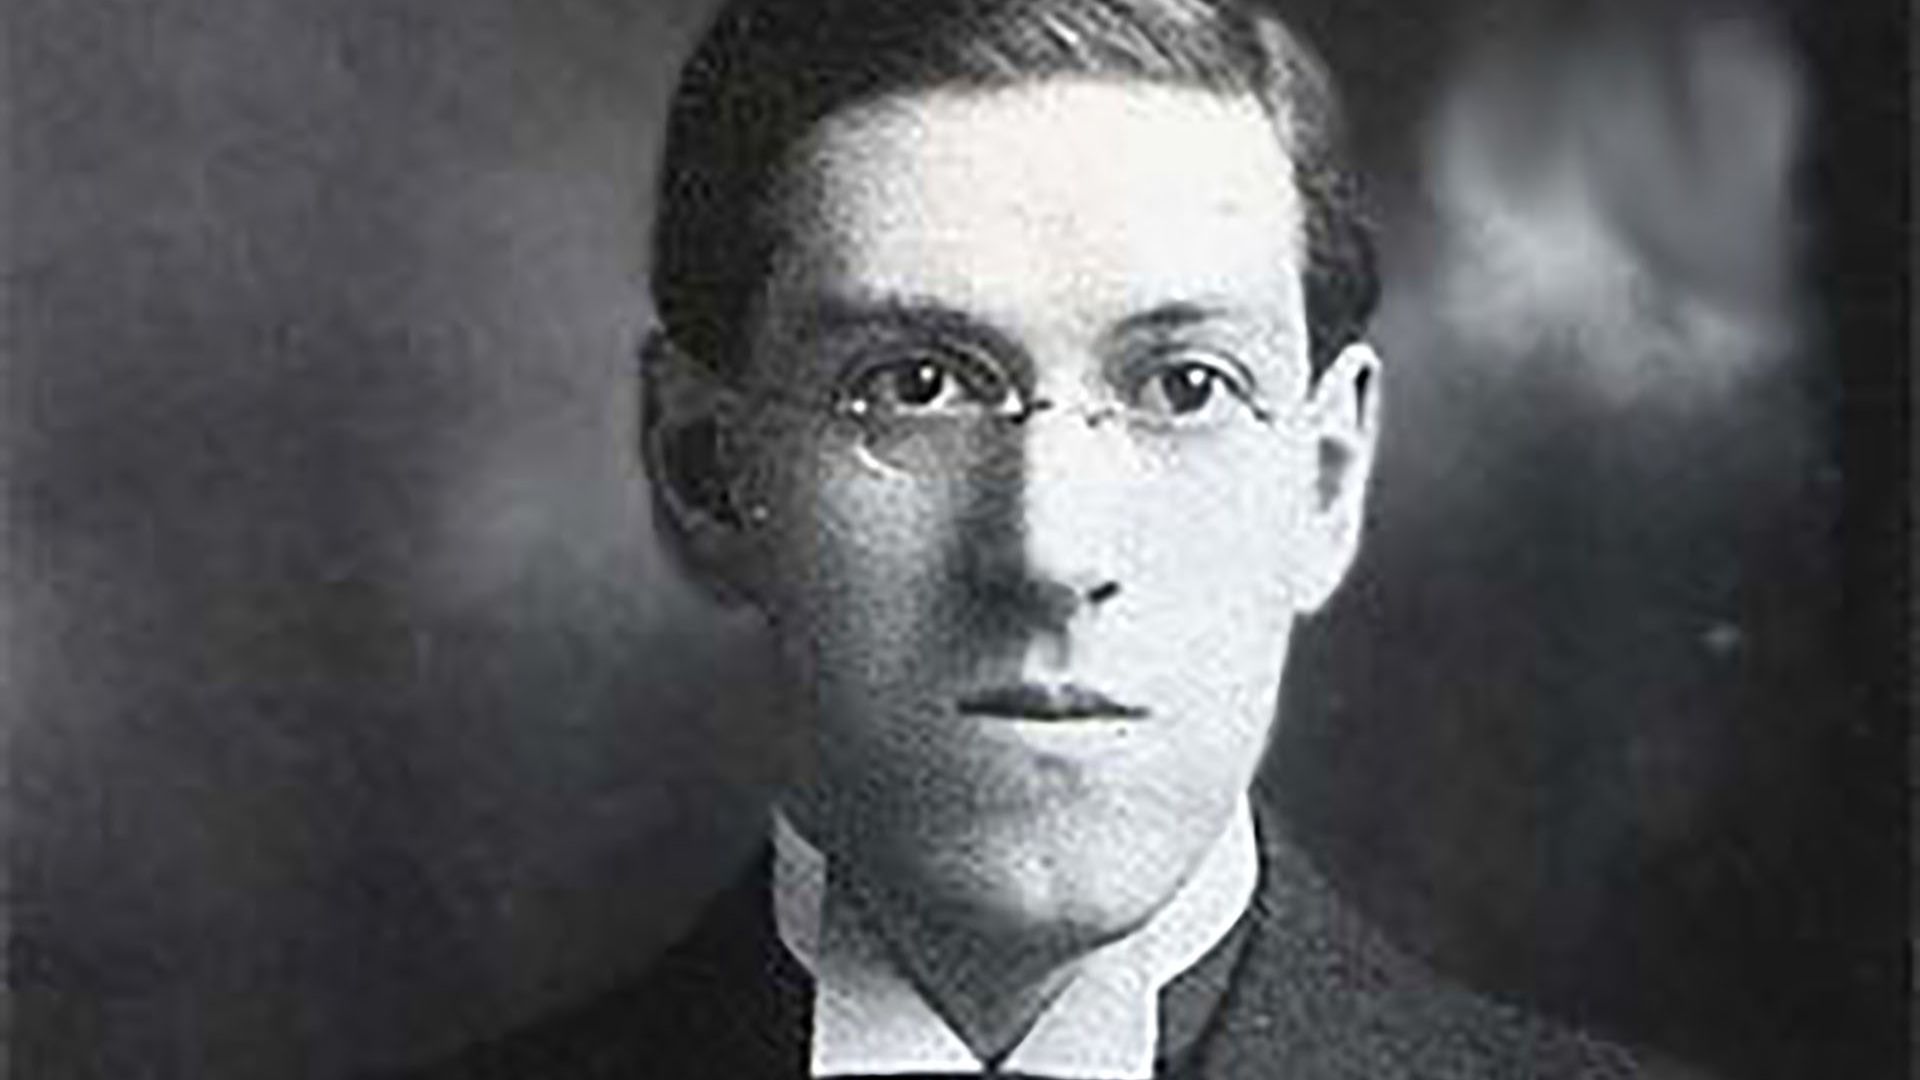 H.P. Lovecraft Wearing Glasses